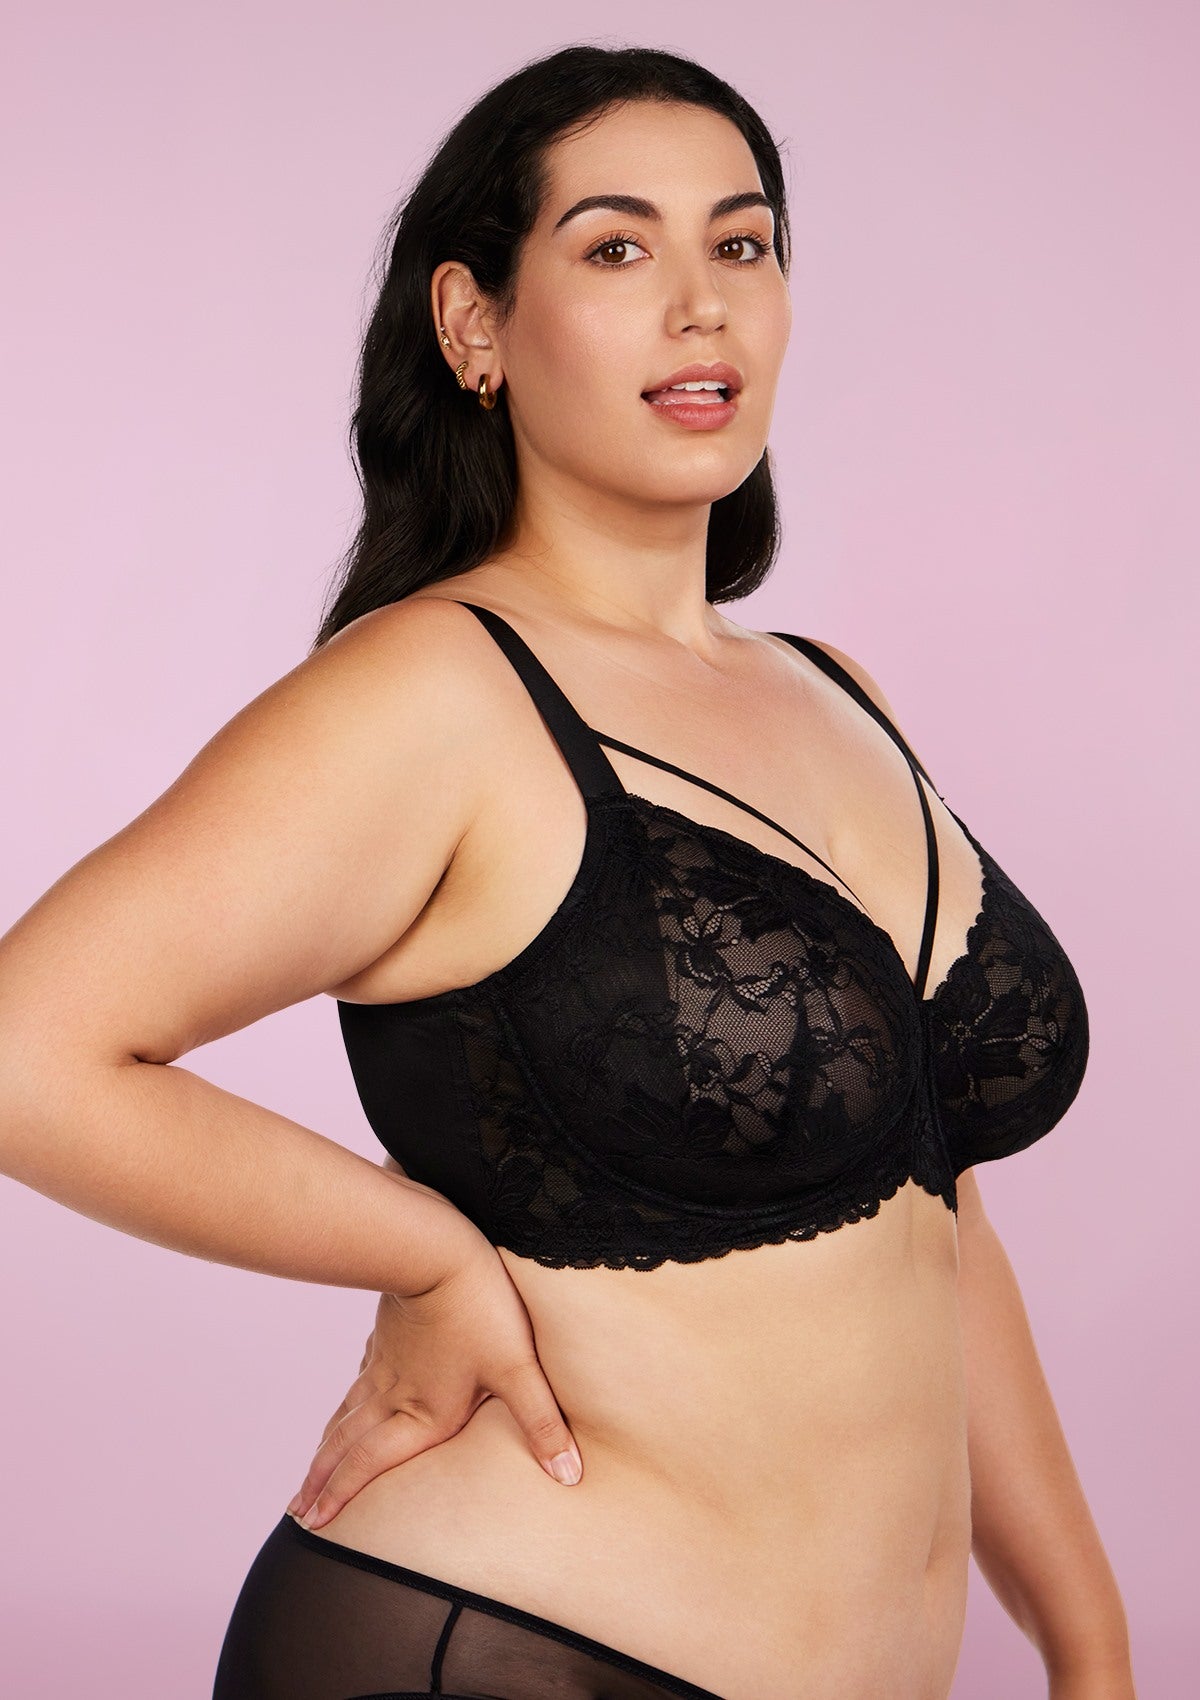 HSIA Pretty In Petals Lace Bra And Panty Set: Non Padded Wired Bra - Black / 44 / B